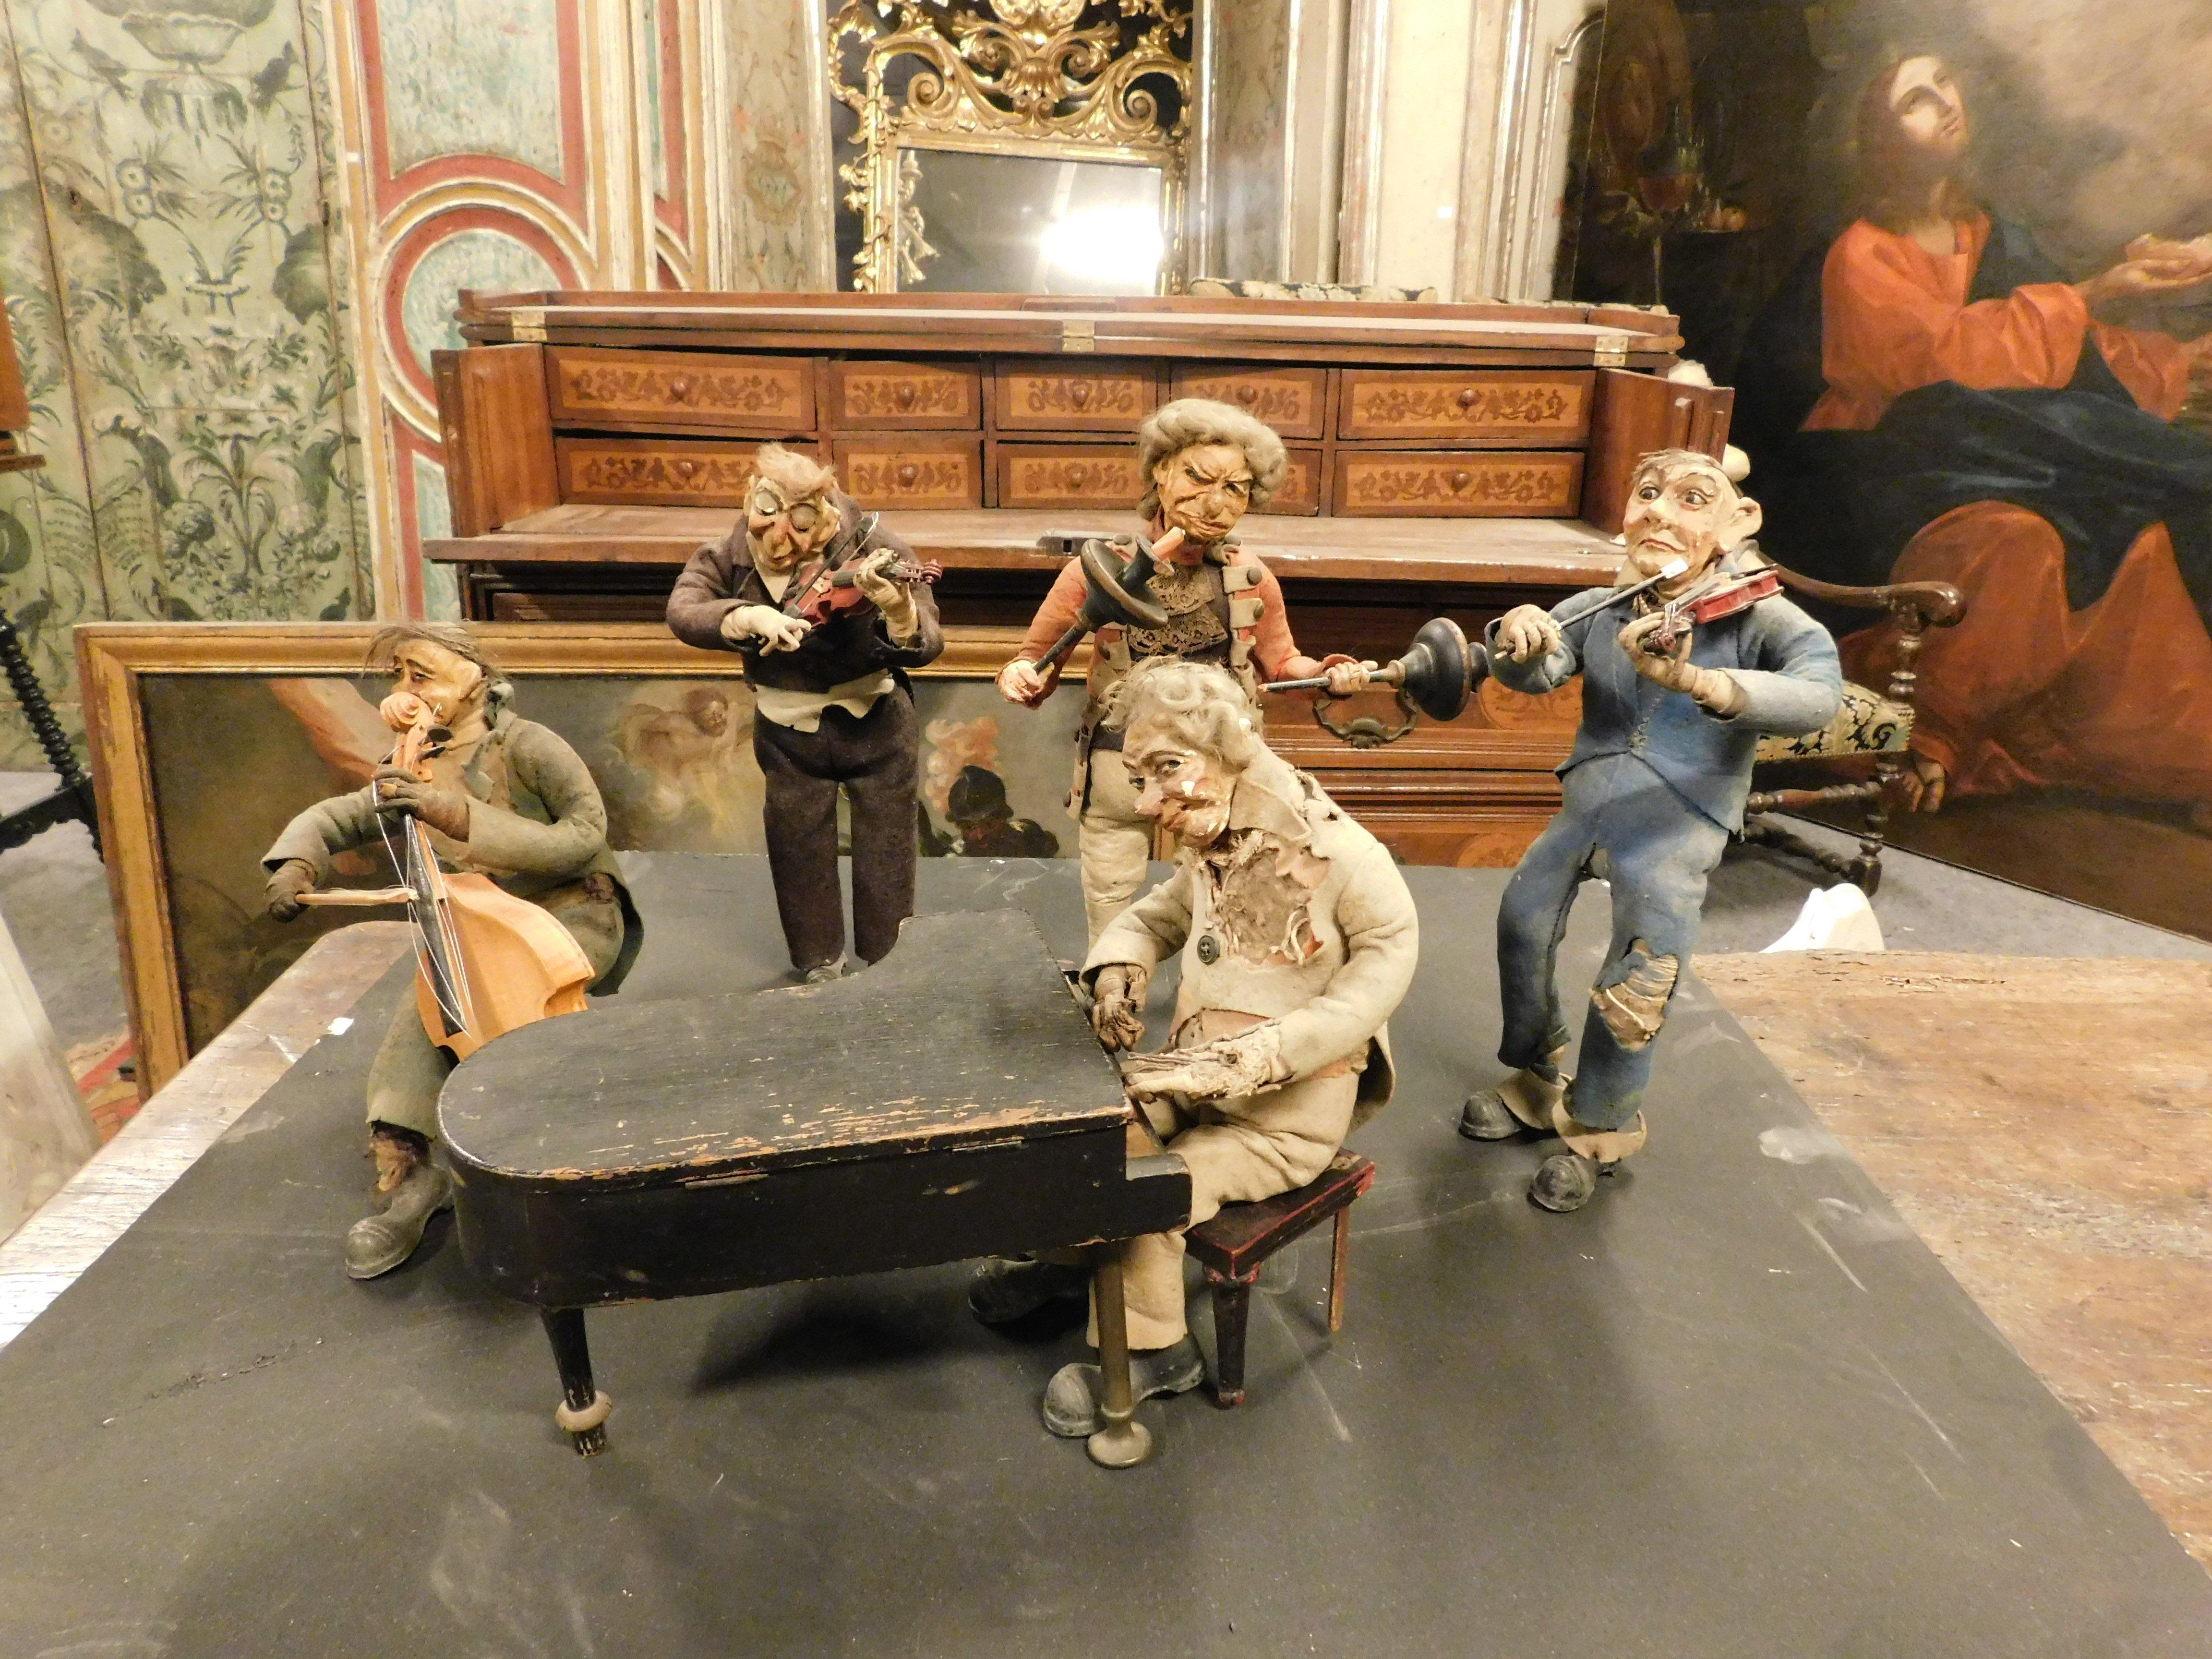 Incredible and very rare set of five antiques piece musicians, built with a fabric body and iron feet to ensure stability, hand-painted papier-mâché head, the piano is a functioning music box, so it also plays, hand-built in Italy for theater or as